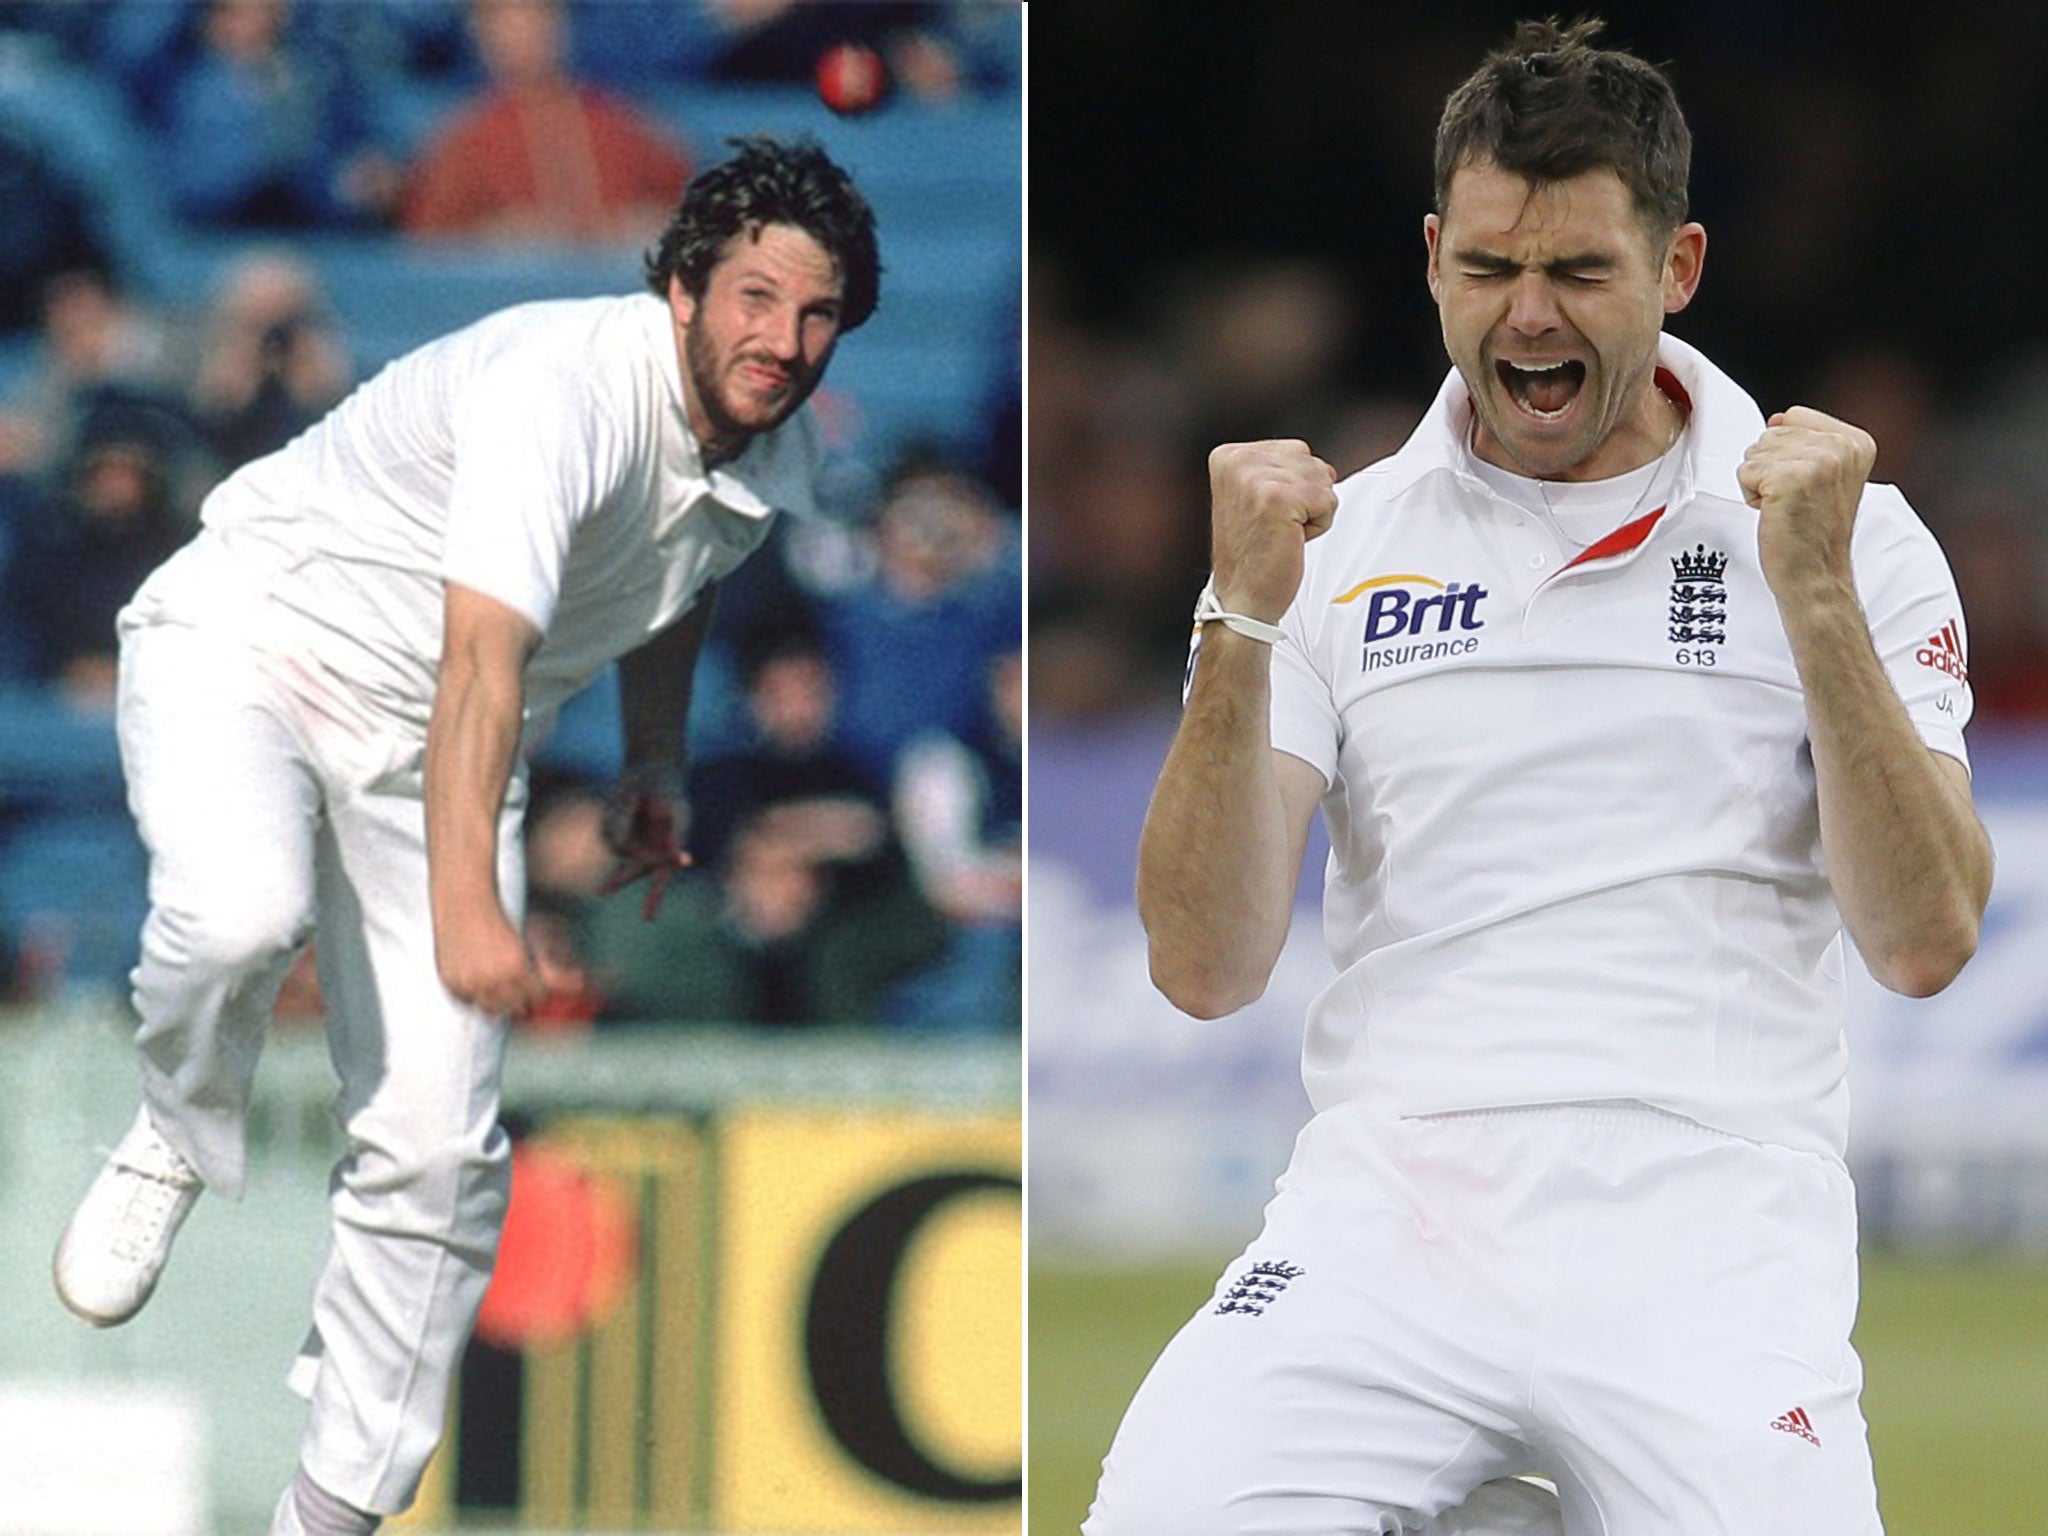 With James Anderson closing in on Sir Ian Botham’s Test wicket record, the third man in England’s standings, Bob Wills, tells Jack Pitt-Brooke the former at his peak was quicker and more explosive but the Burnley boy has greater disguise